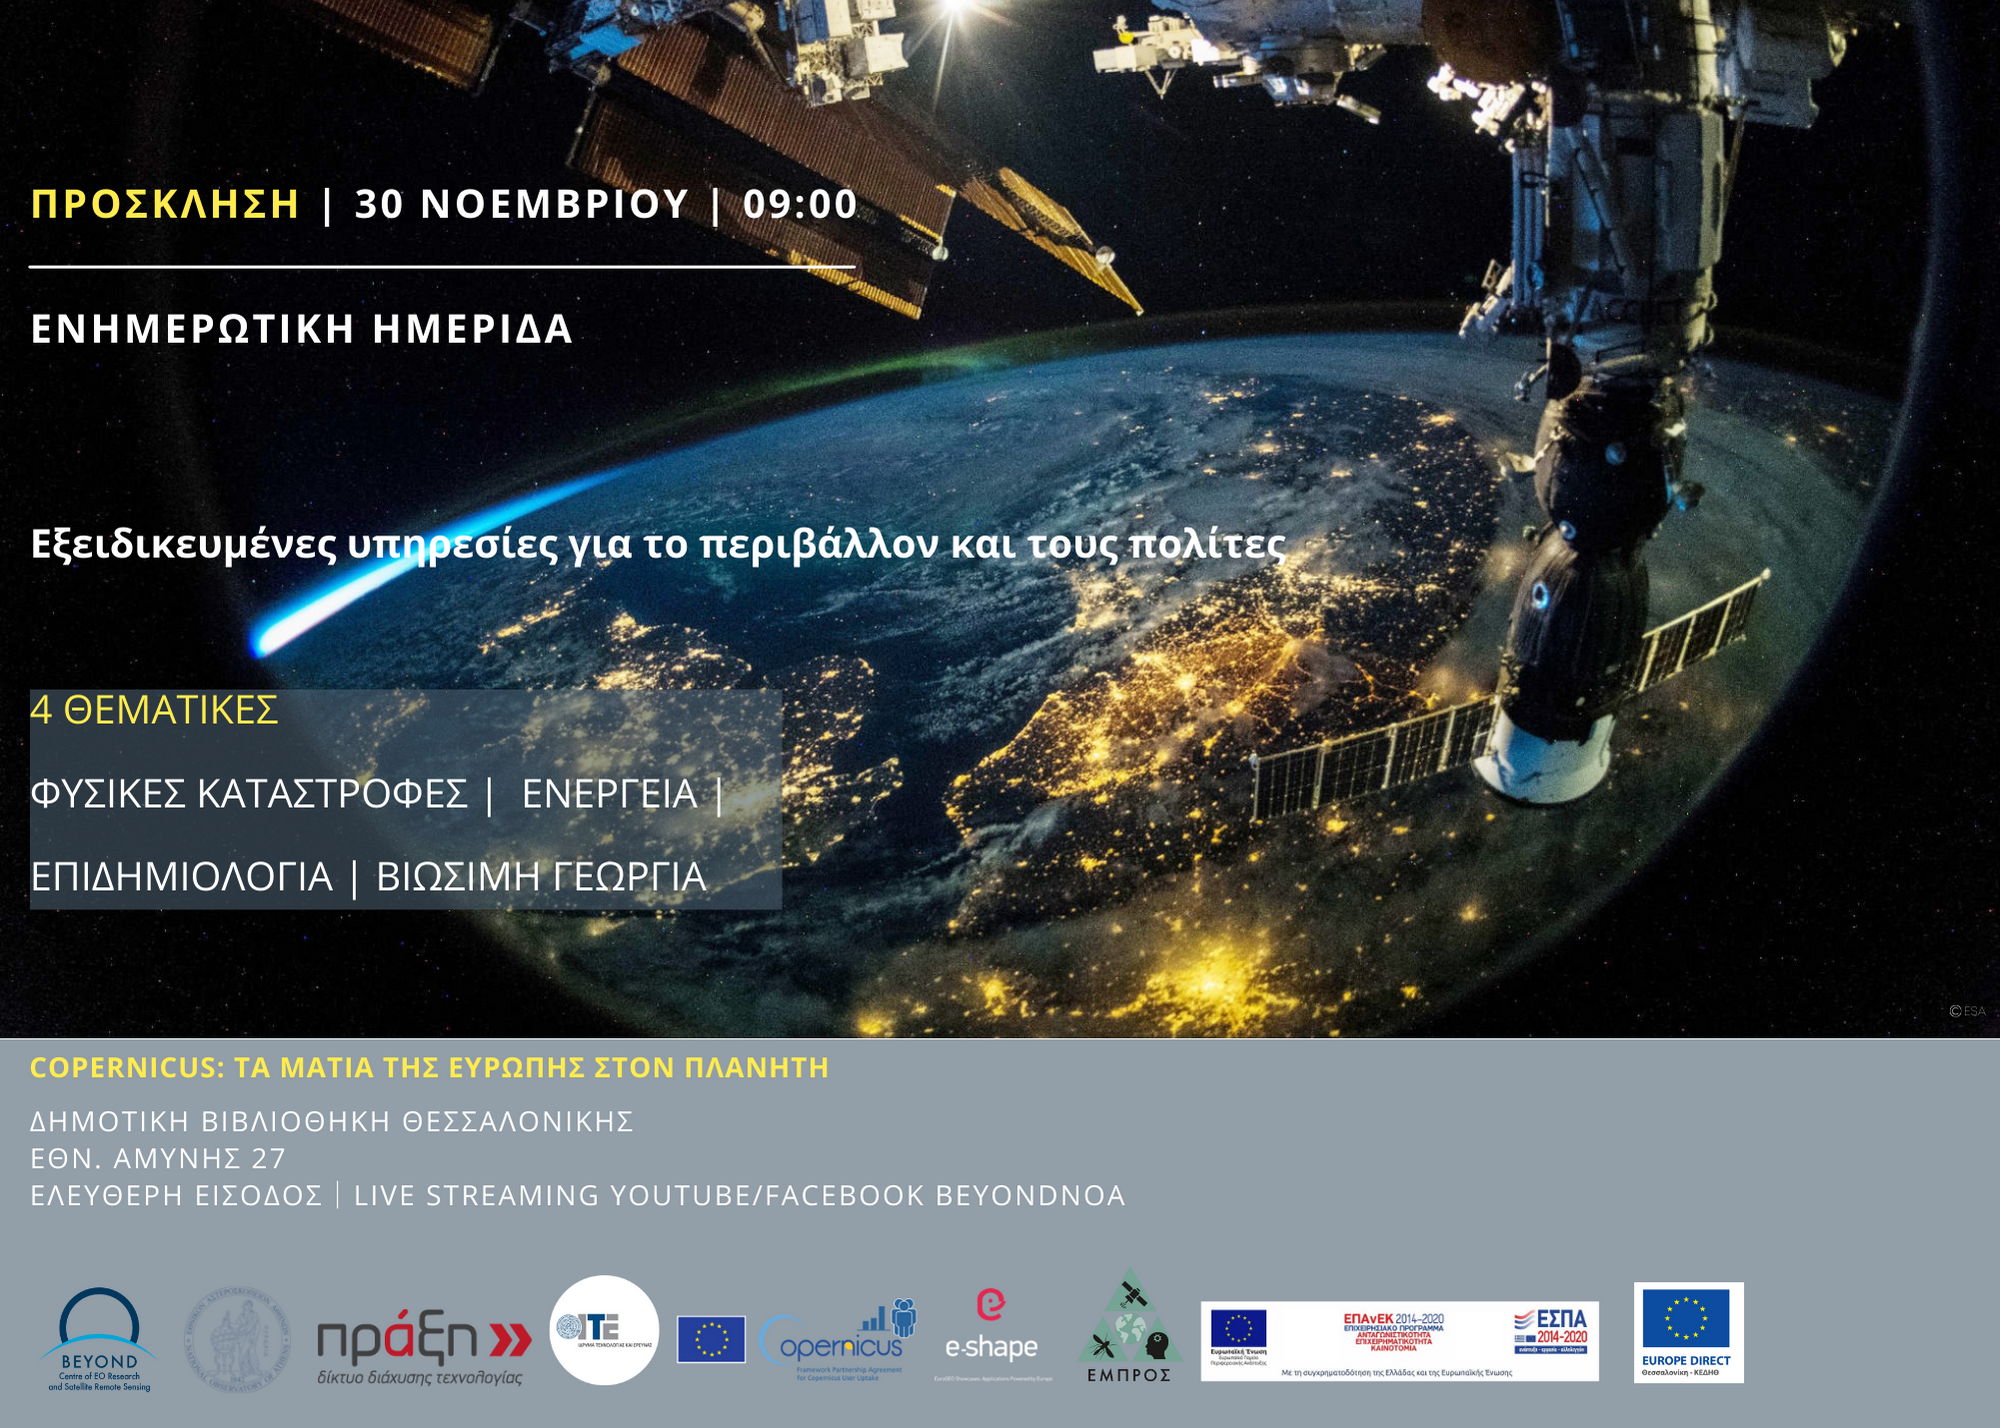 EIFFEL at Info Day on Copernicus data & services